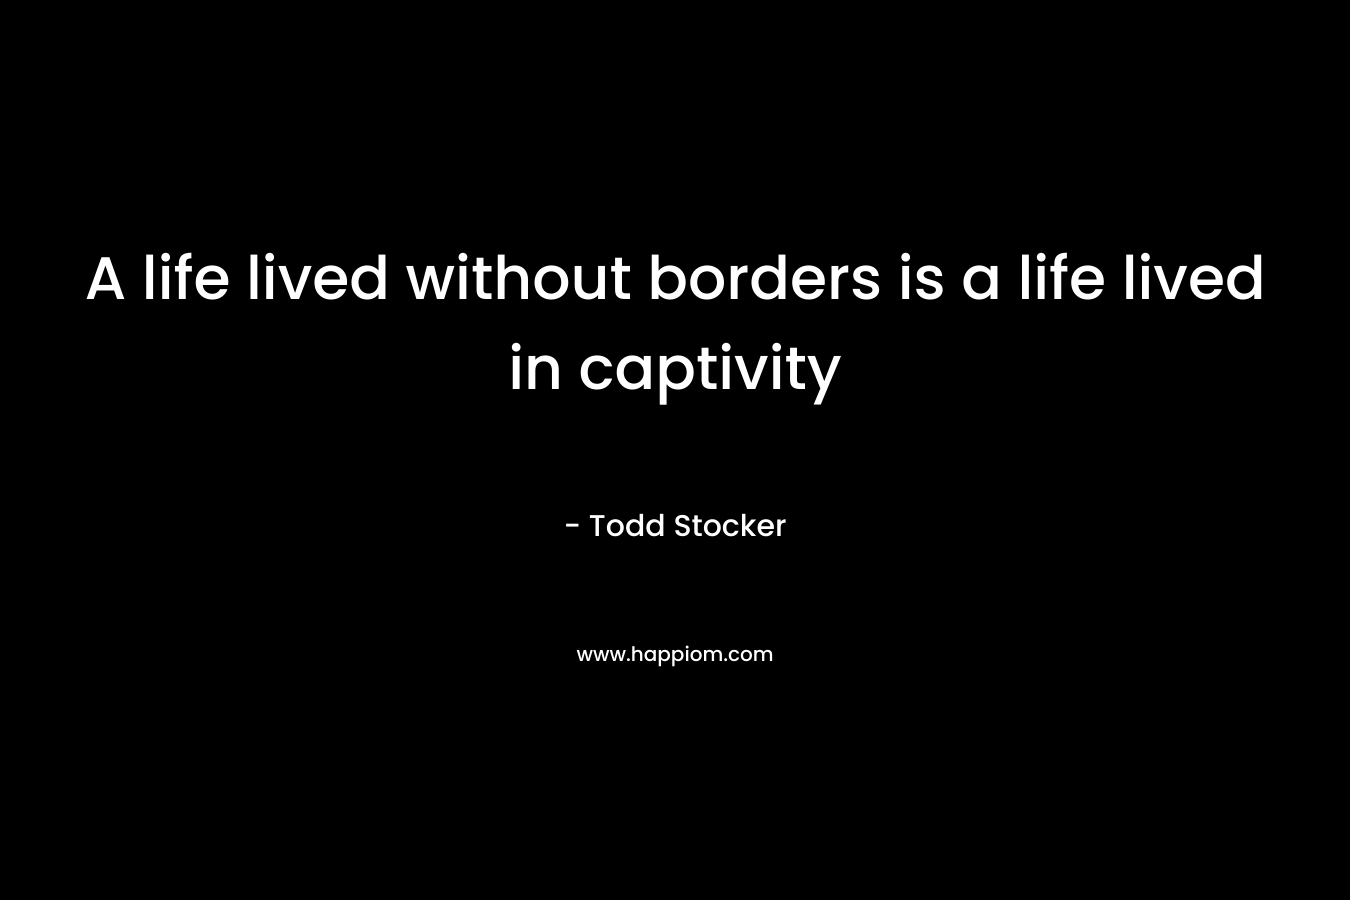 A life lived without borders is a life lived in captivity